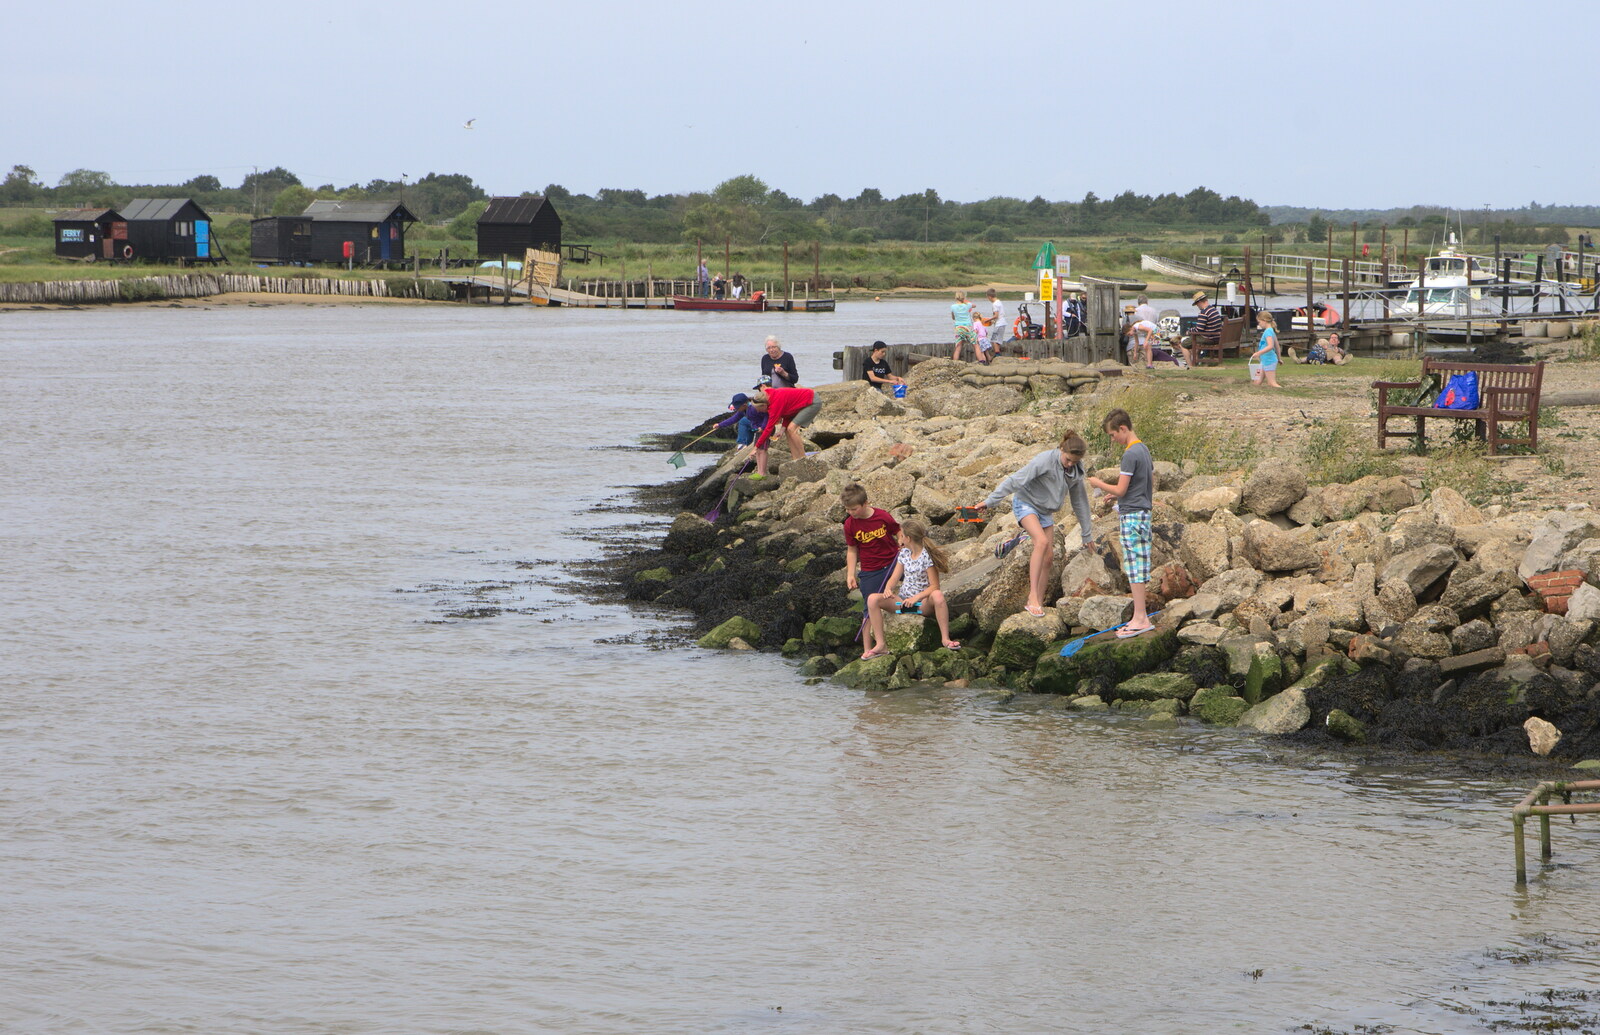 There's loads of crabbing down at the harbour from The Danger of Trees: A Camping (Mis)adventure - Southwold, Suffolk - 3rd August 2015